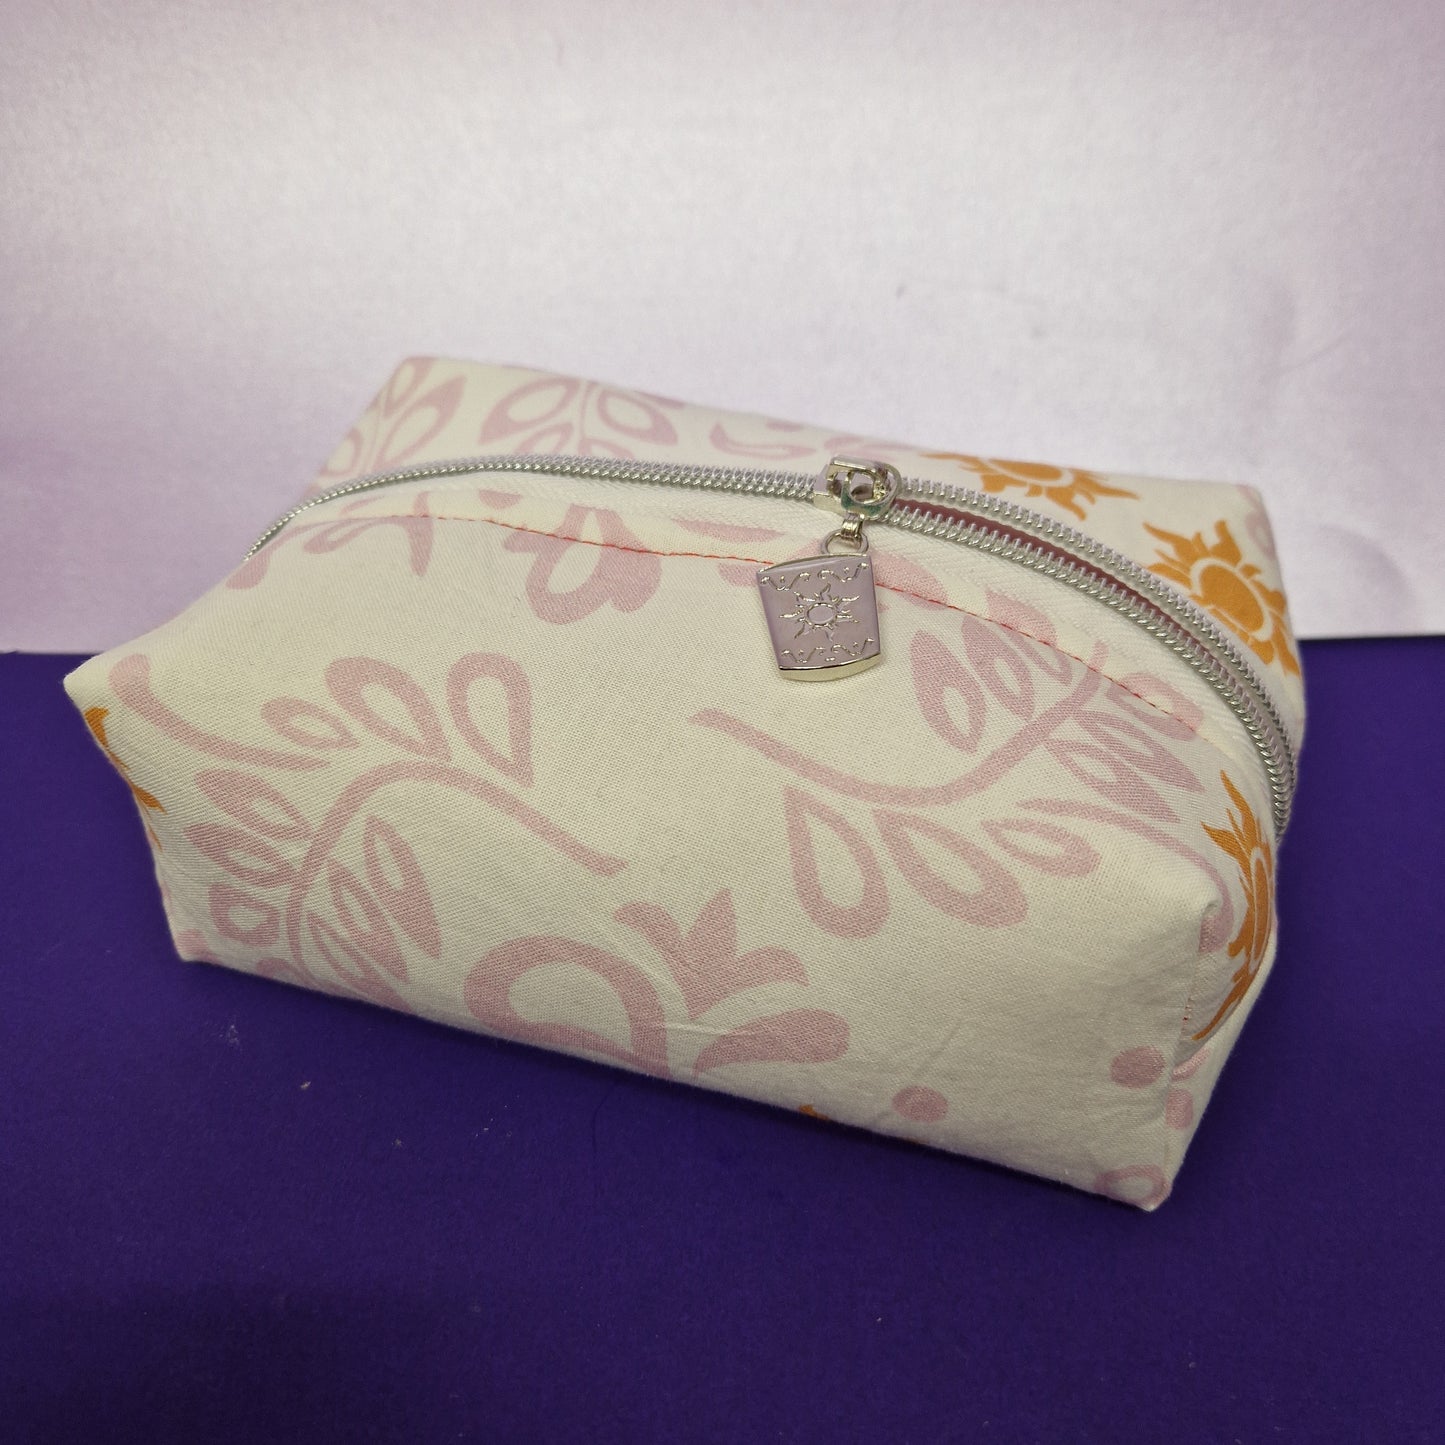 Floral Sun boxy pouch cosmetic bag with a floating lantern zipper pull